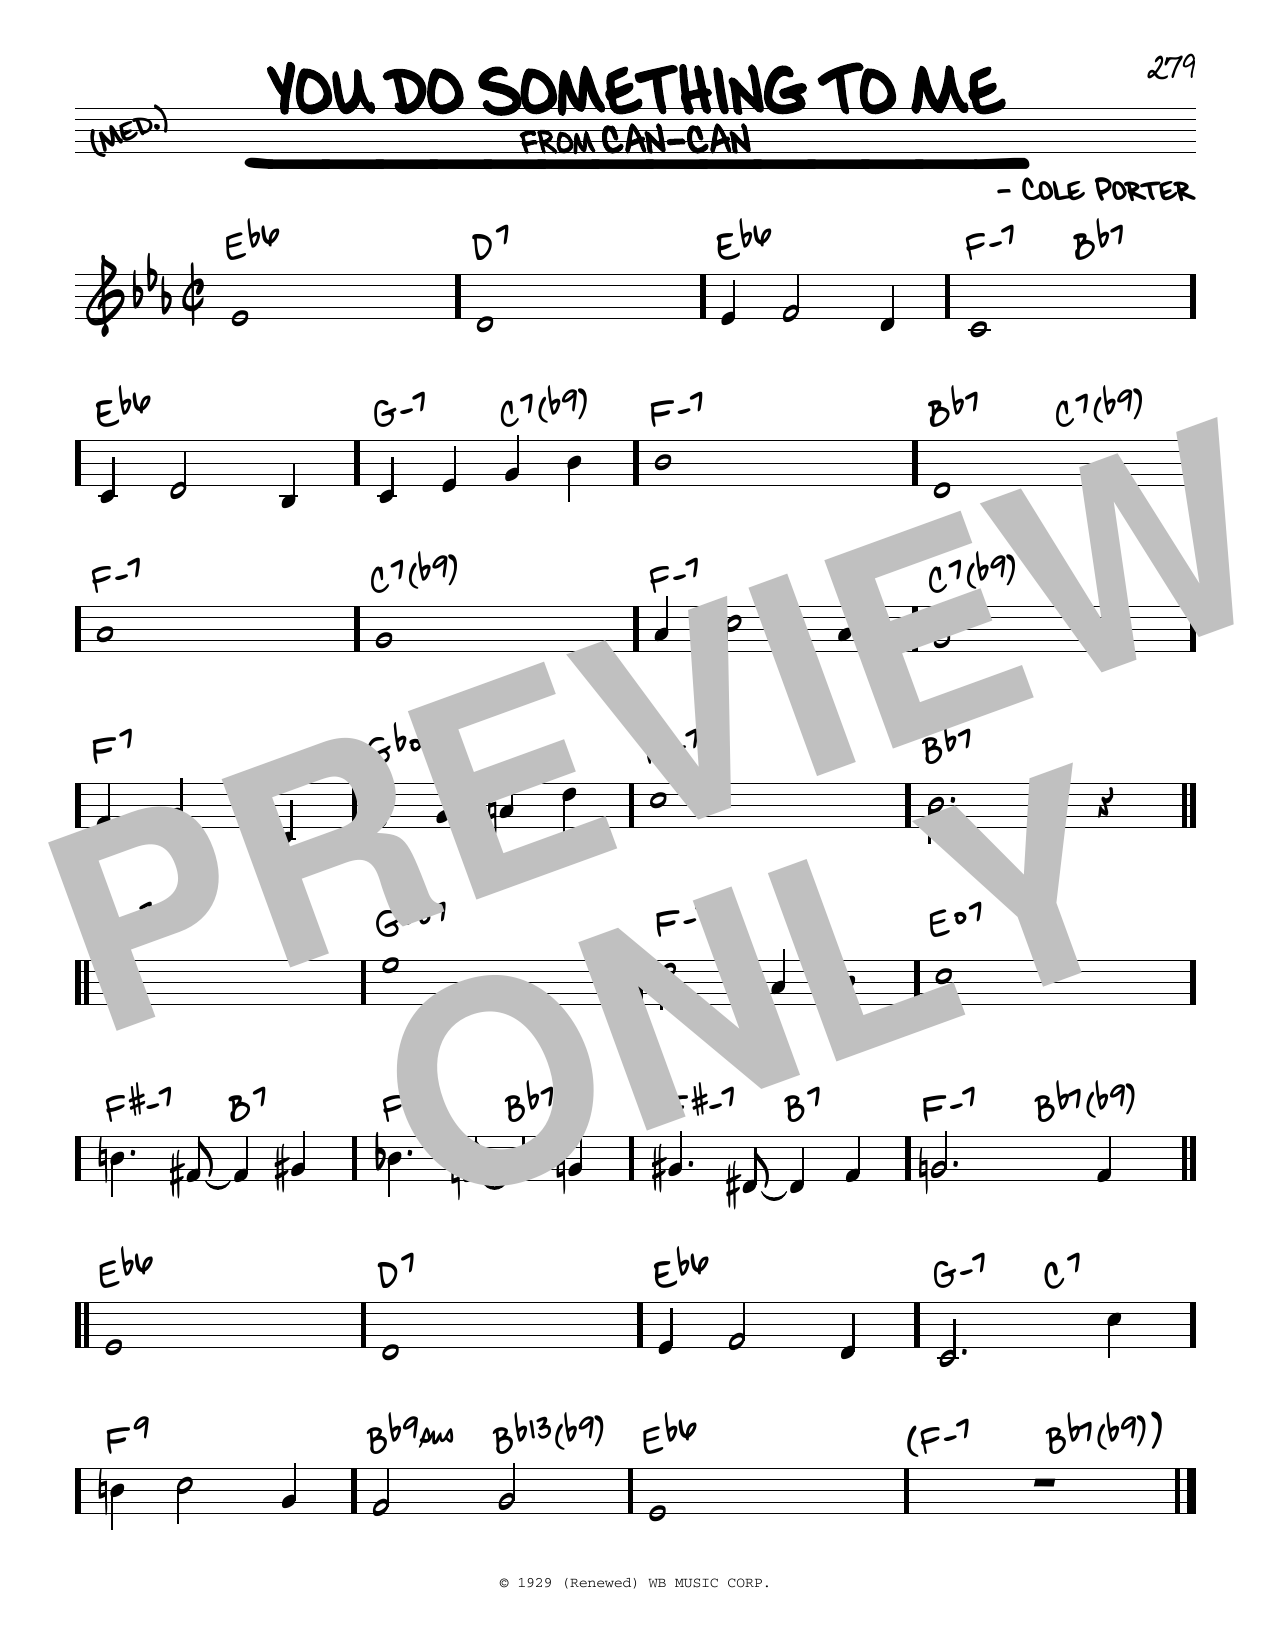 Download Cole Porter You Do Something To Me Sheet Music